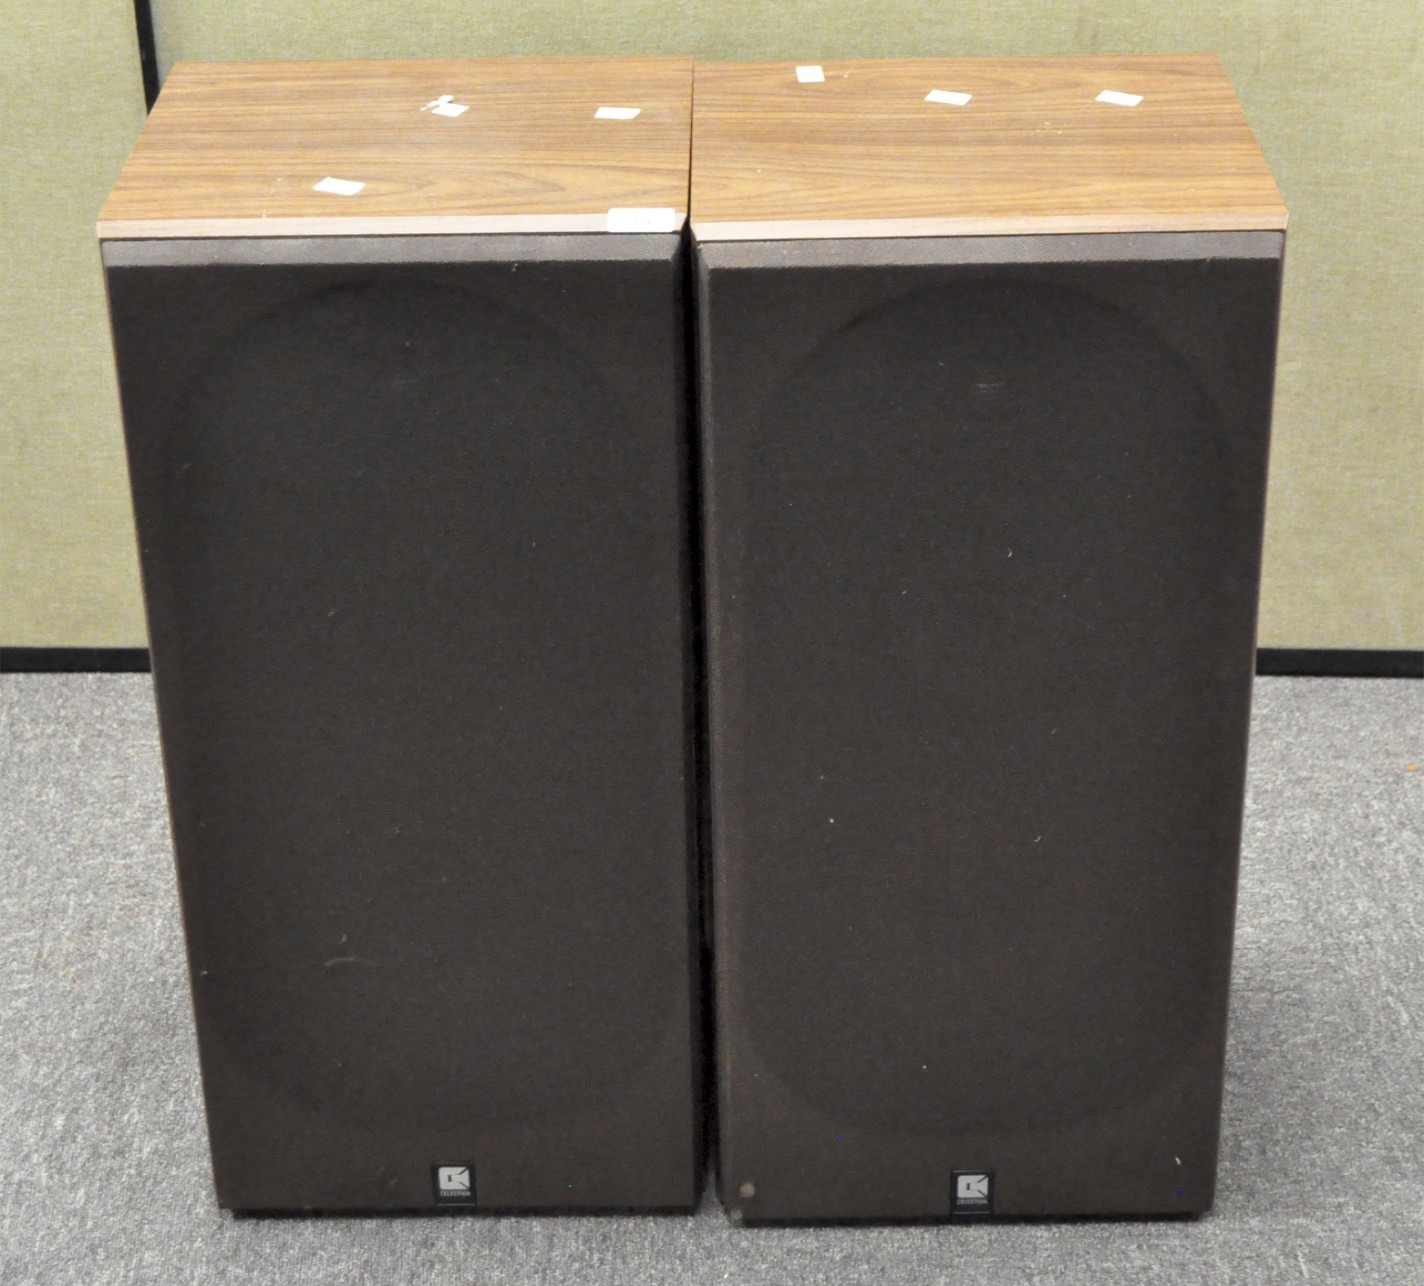 A pair of Celestion Dh 10 large Hi-Fi speakers, made in ipswich,